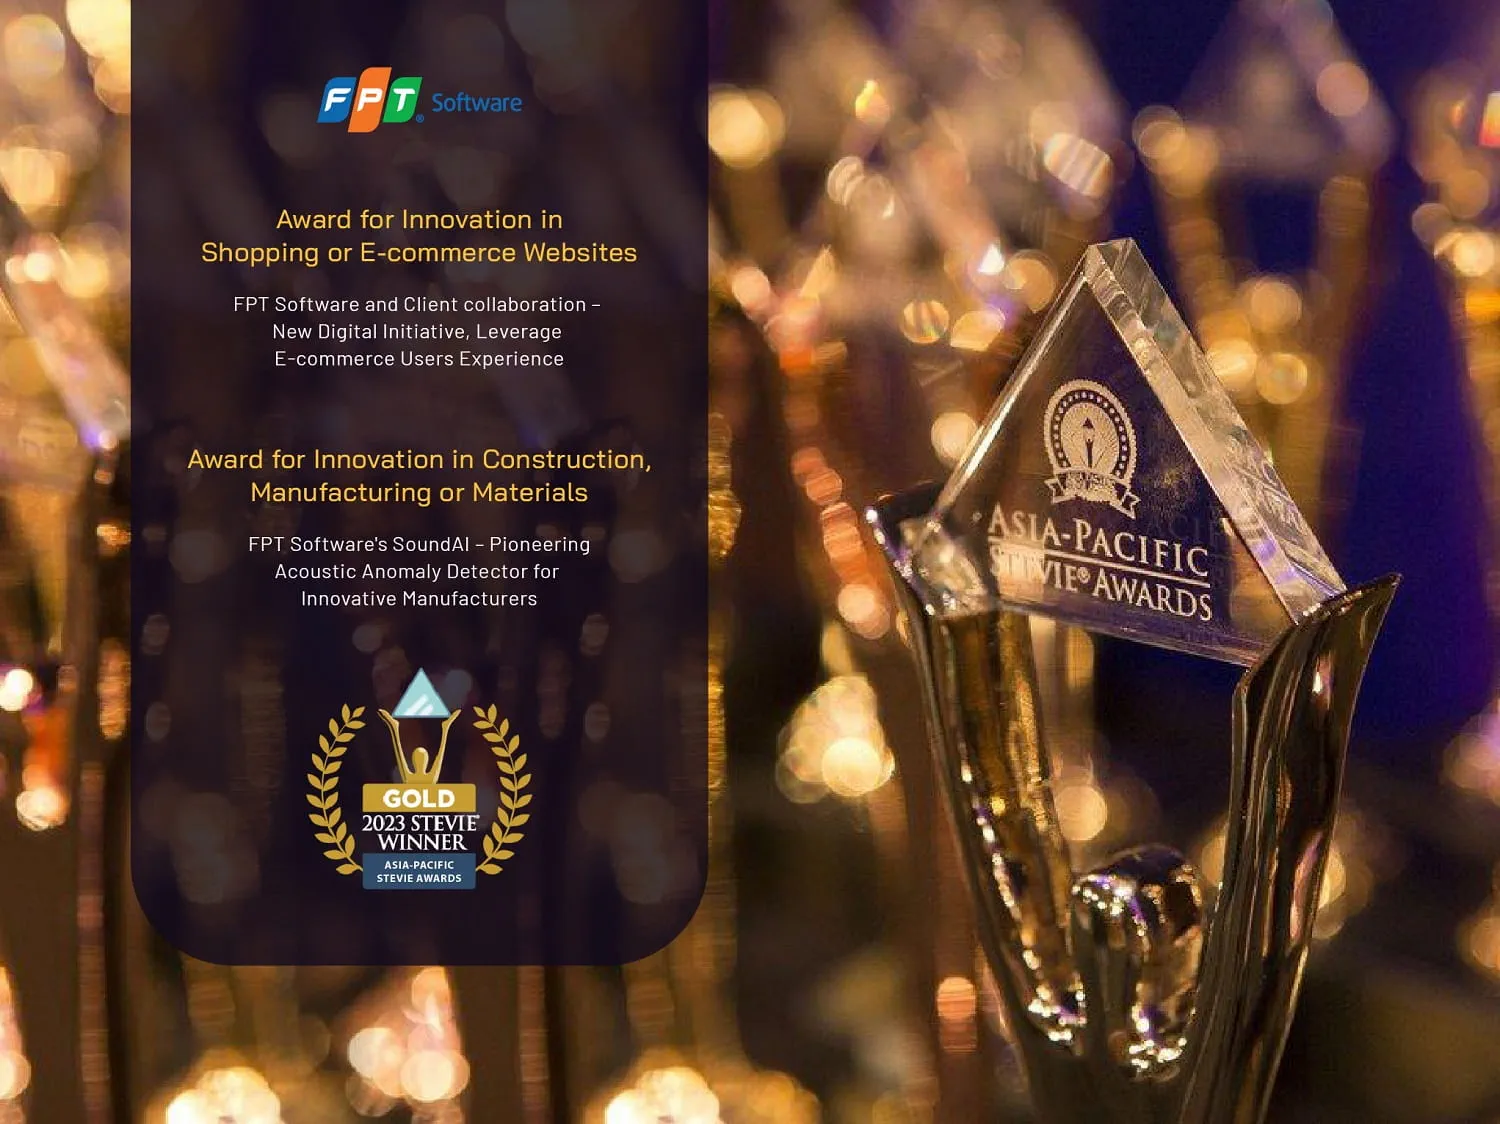 With two Gold awards, FPT was in a limited group of companies in the Press Release of the award organizers.